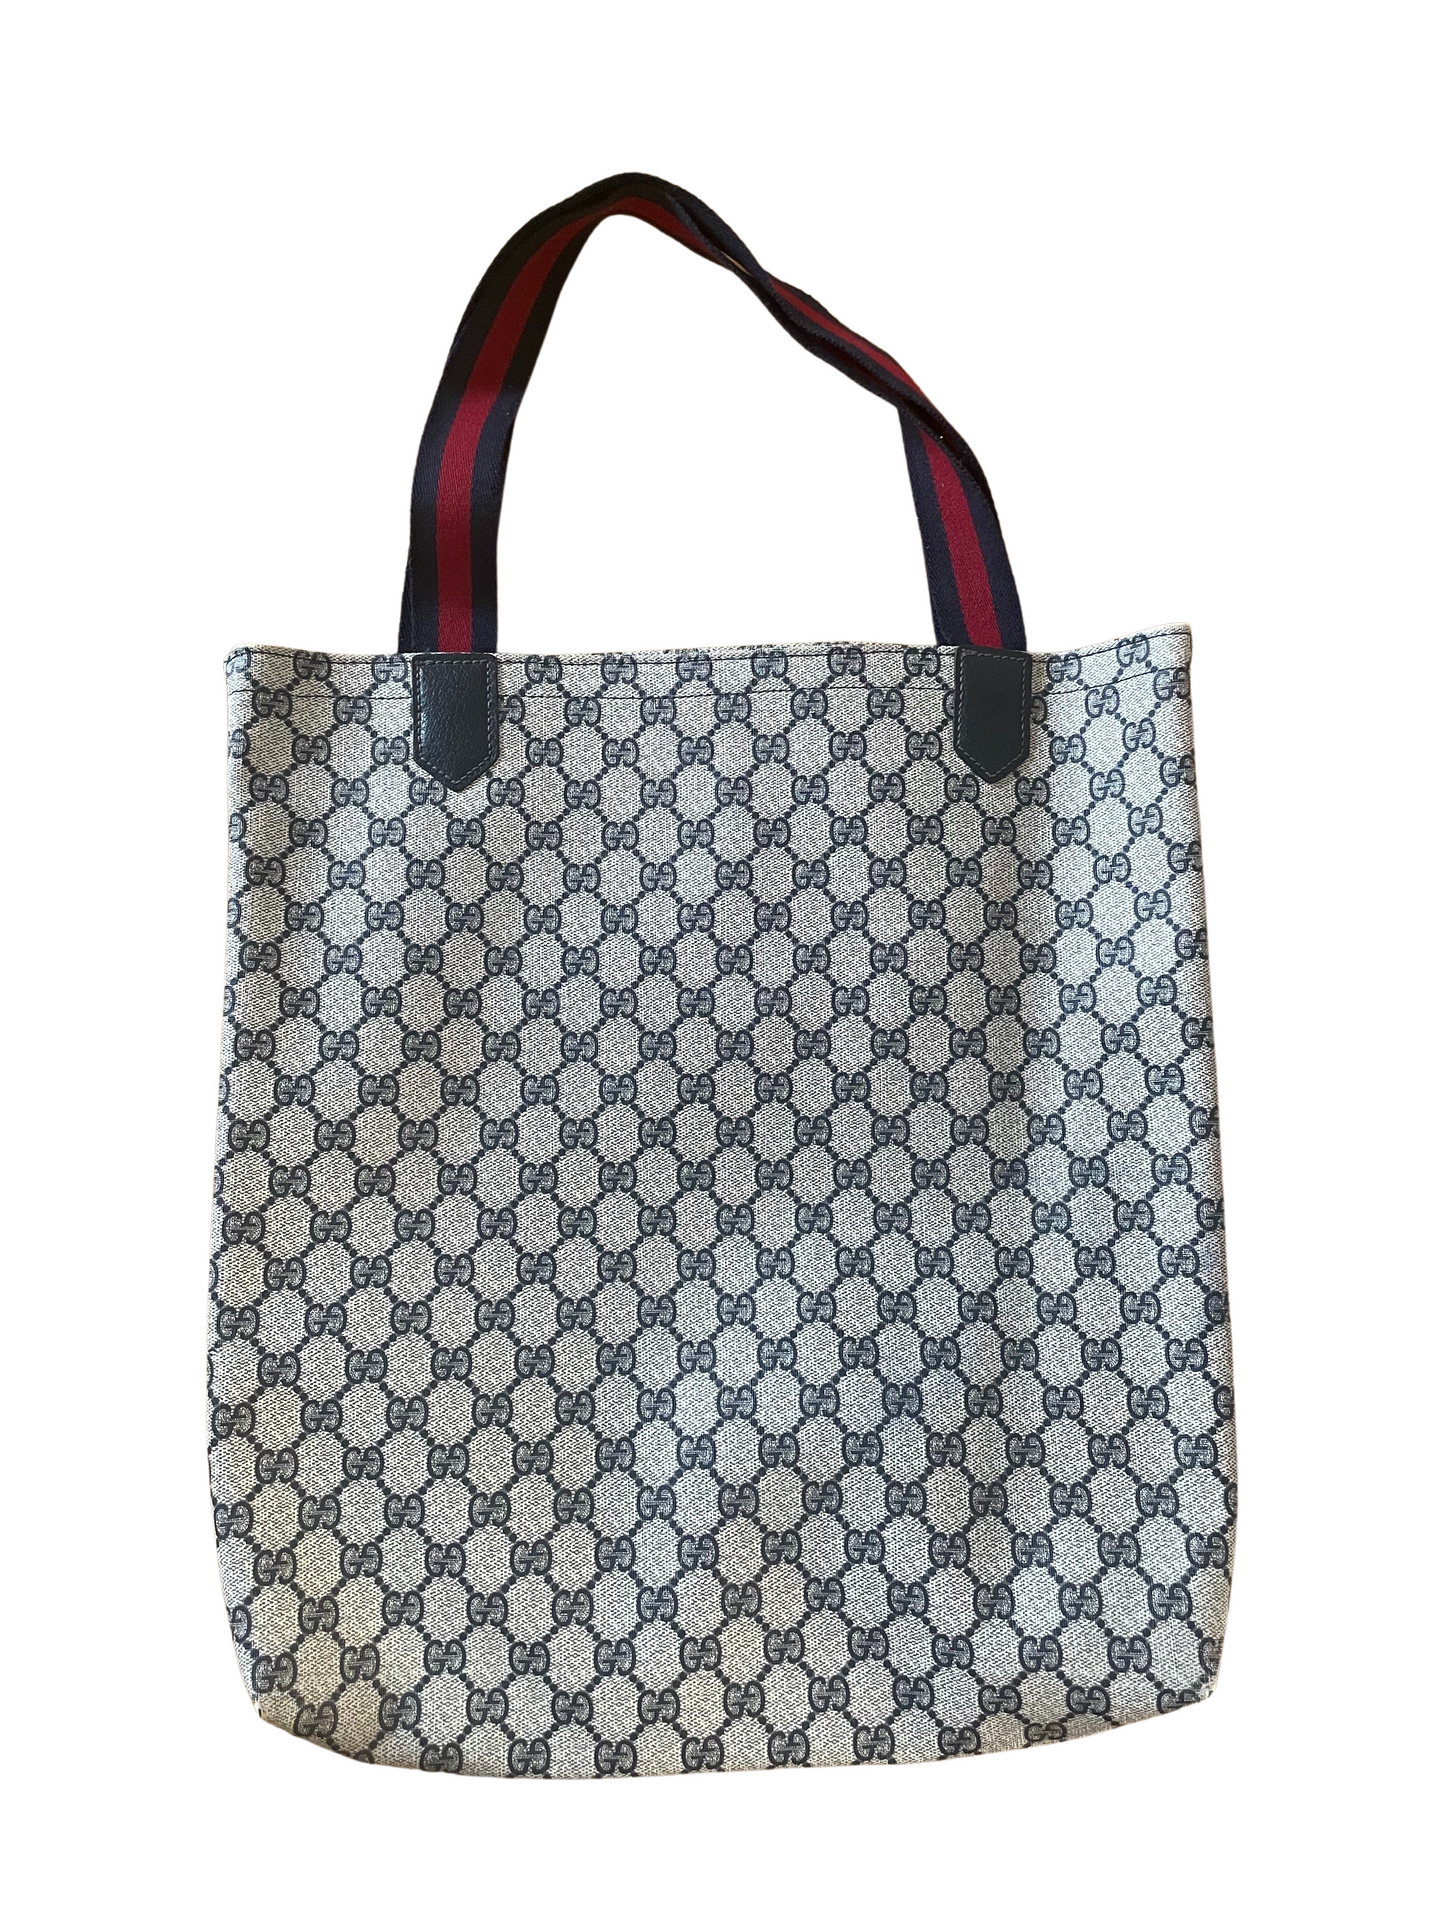 Gucci Light Gray Navy Red Tote Bag